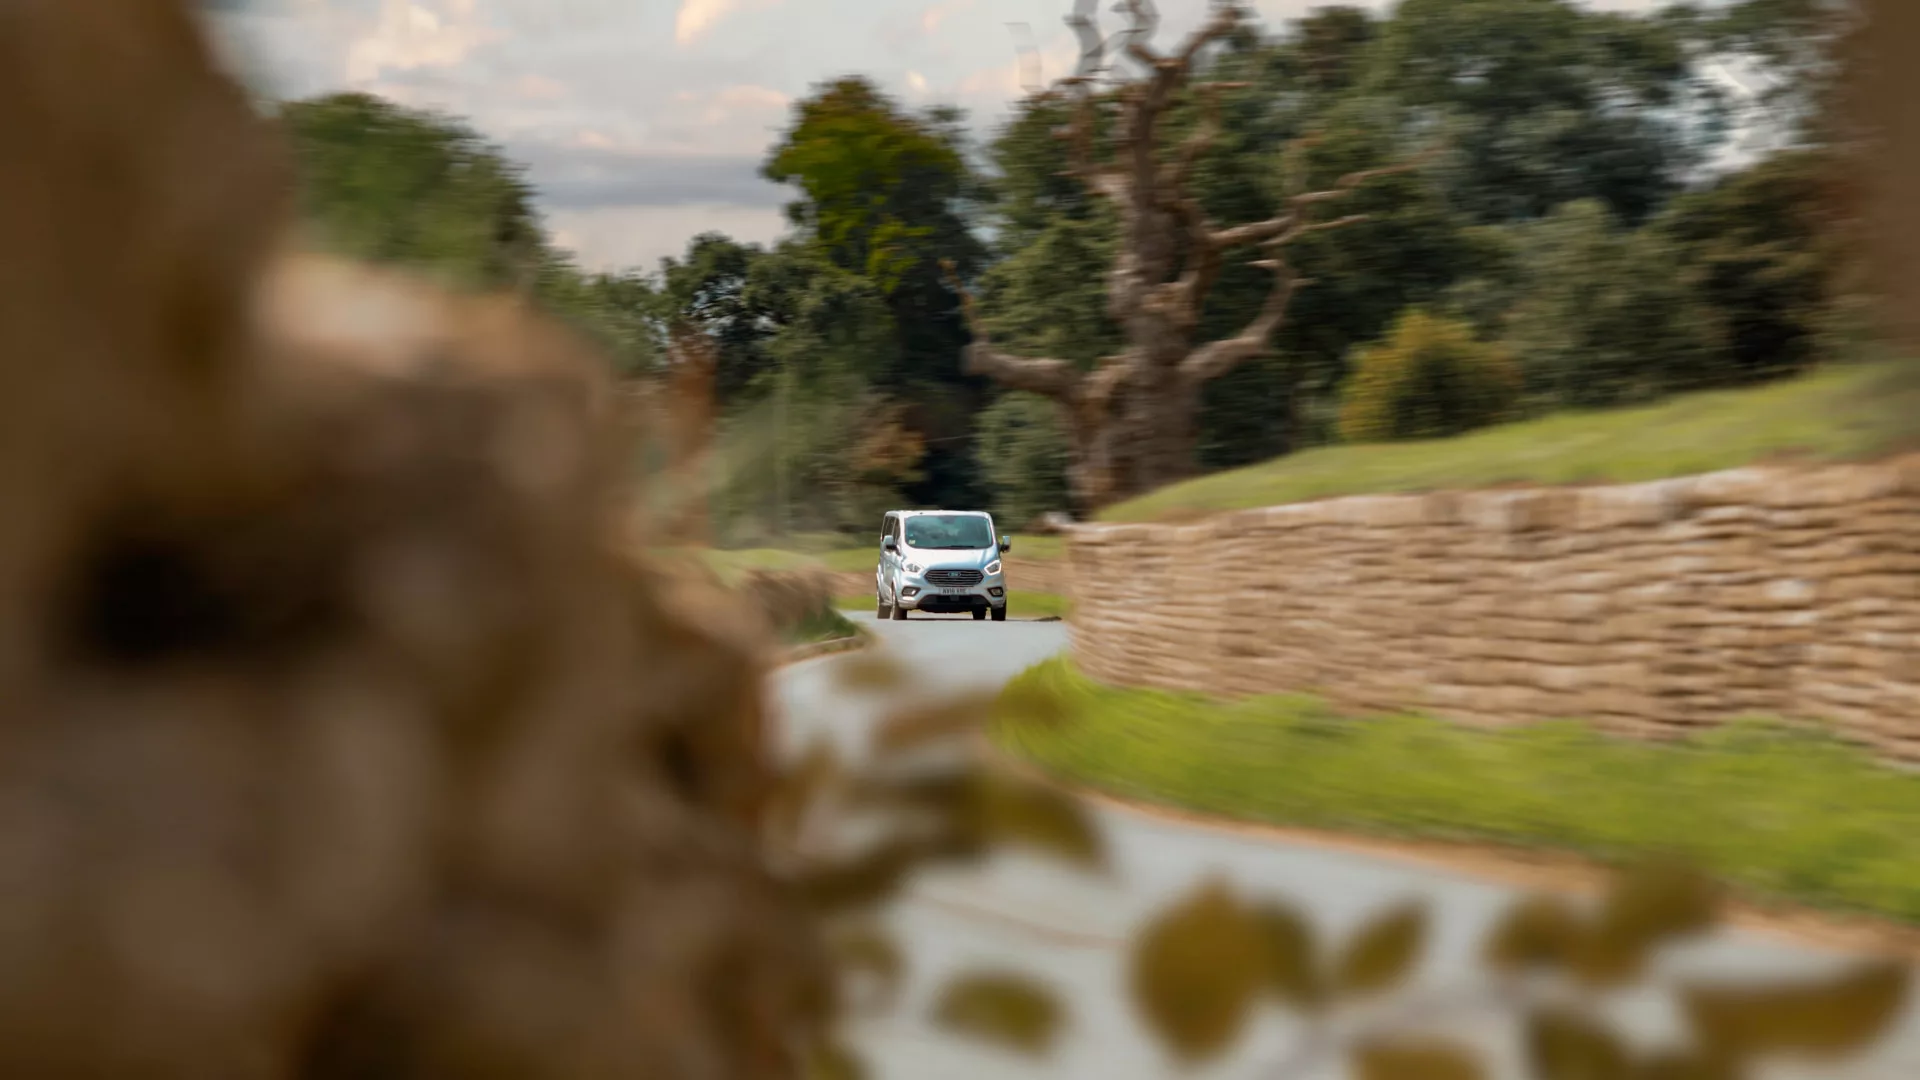 A van winds through a twisty lane where walls stand either side. There is foliage and trees in the foreground and background. Motion blur throughout the image.